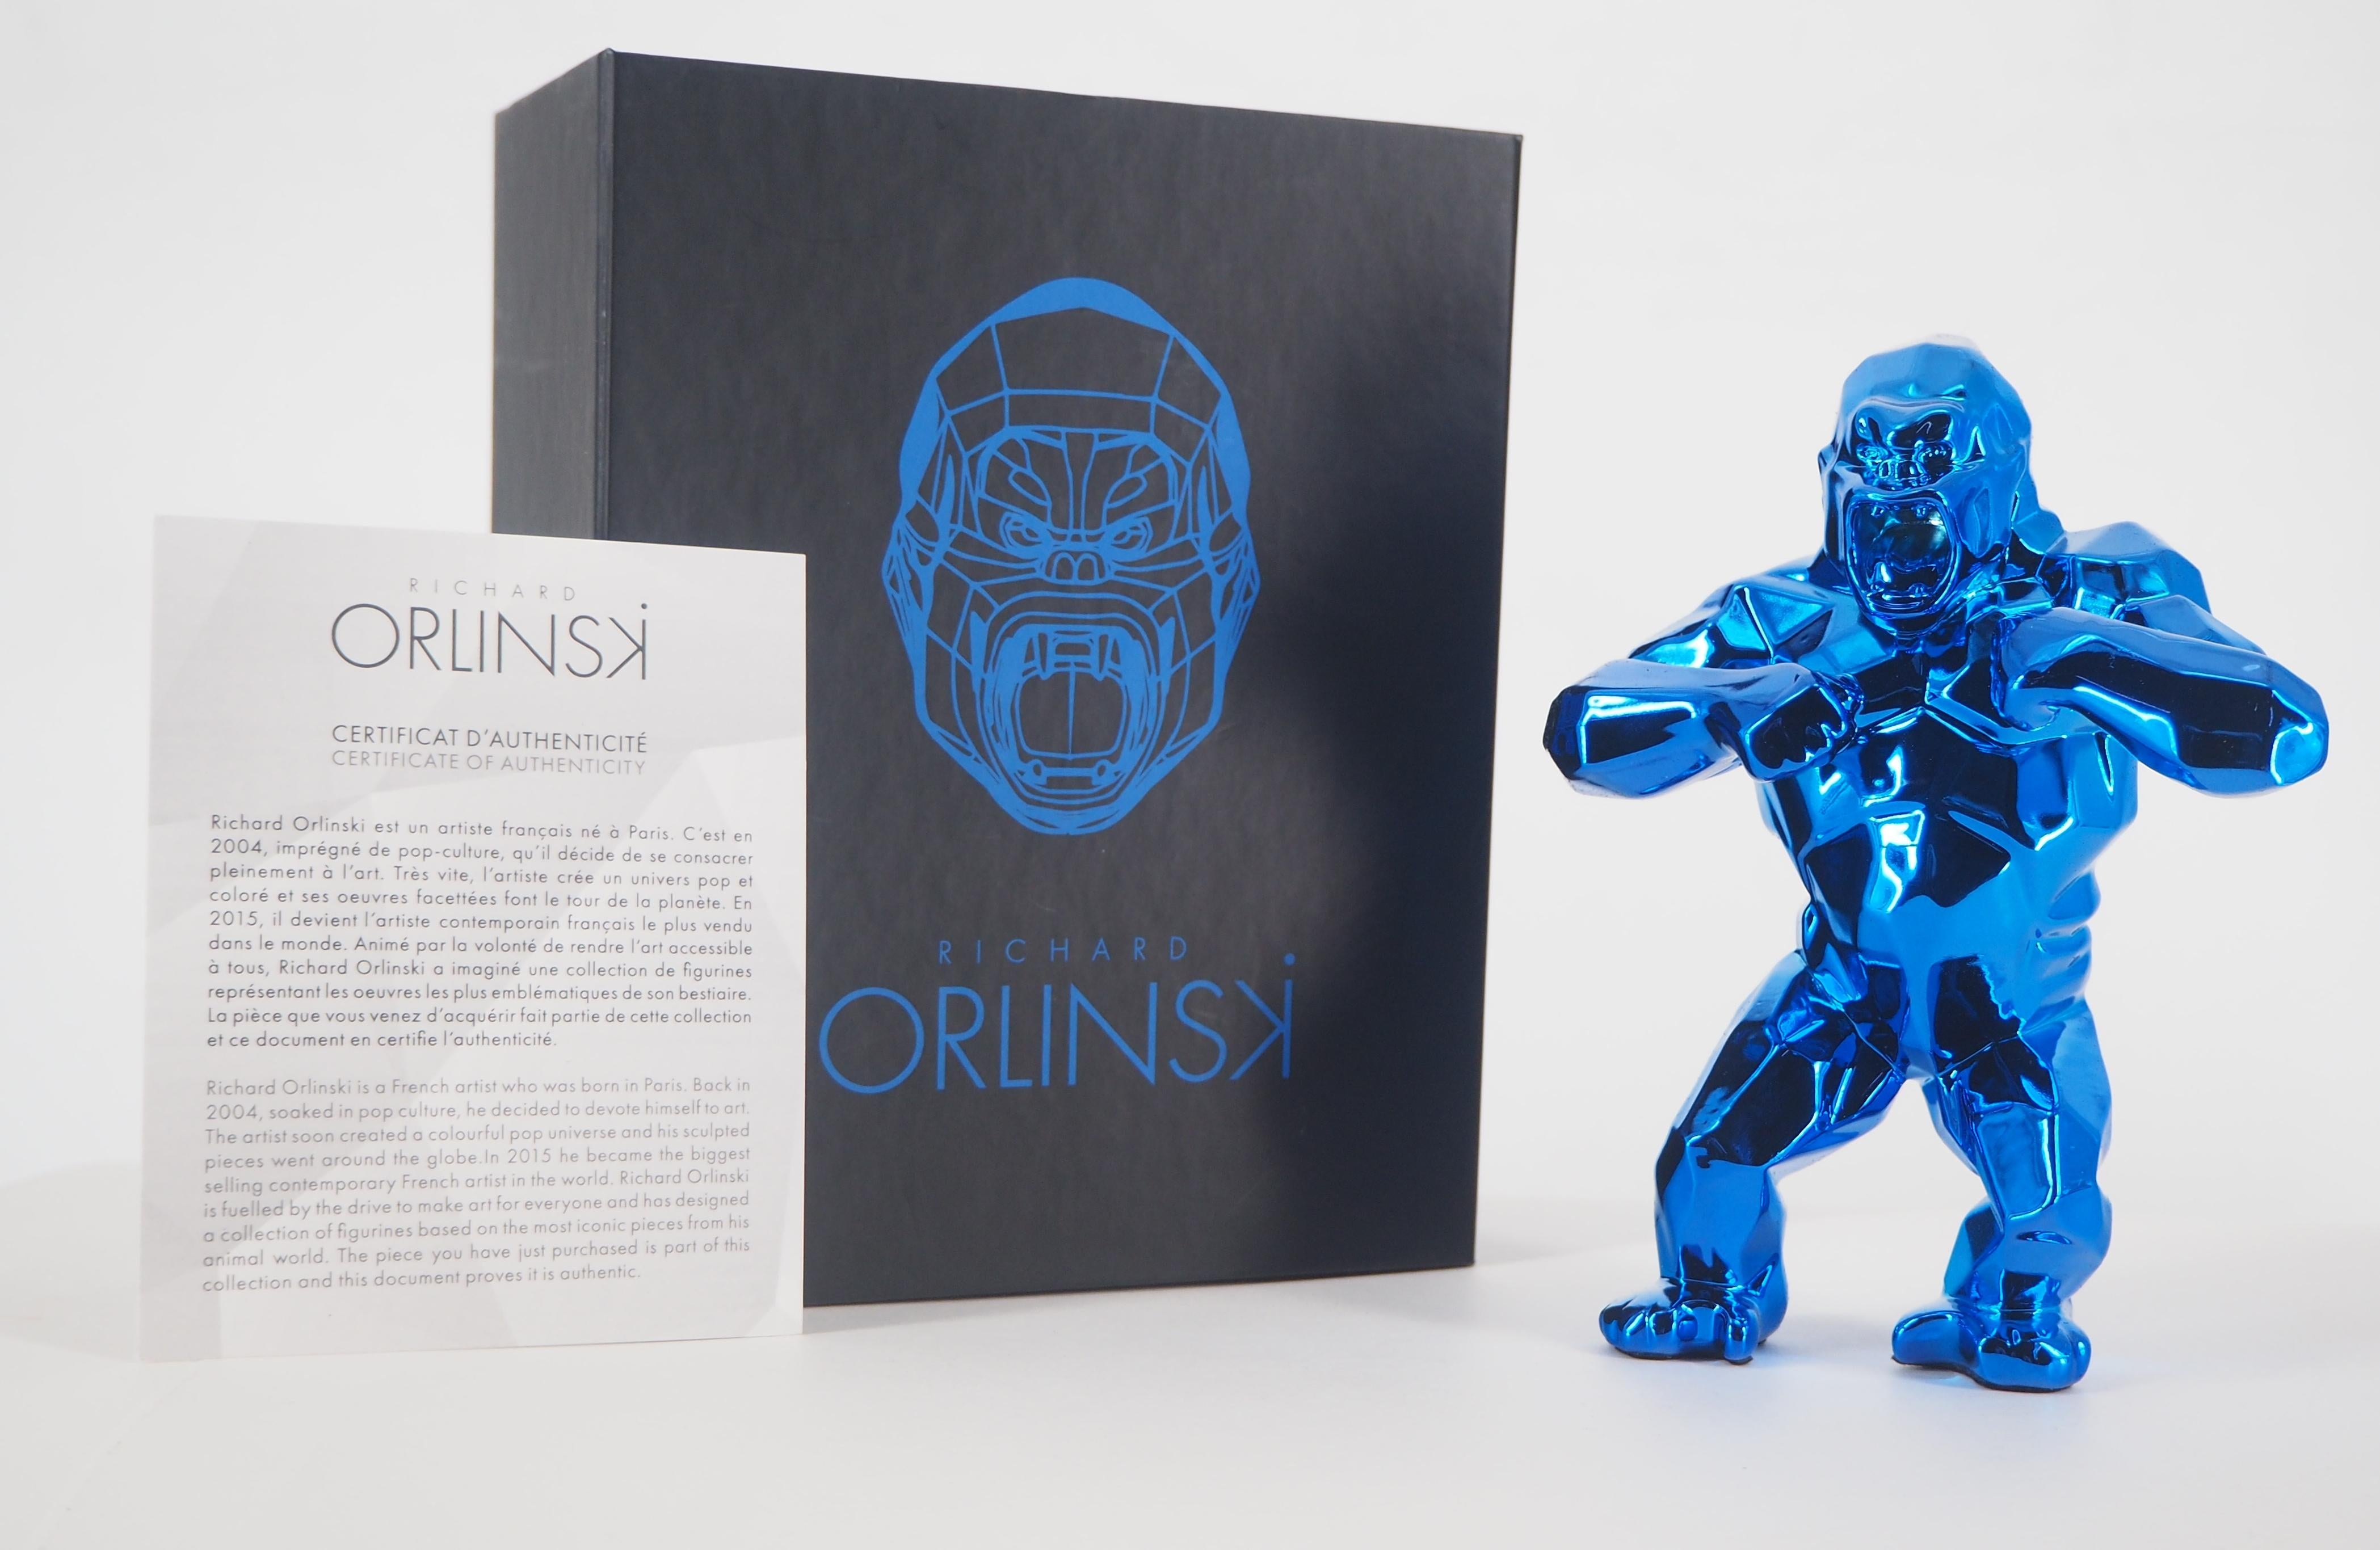 Richard ORLINSKI
Kong Spirit (Blue edition)

Sculpture in resin
Metallic Blue
About 13 x 10 cm (c. 5.1 x 3.9 in)
Presented in original box with certificate

Excellent condition